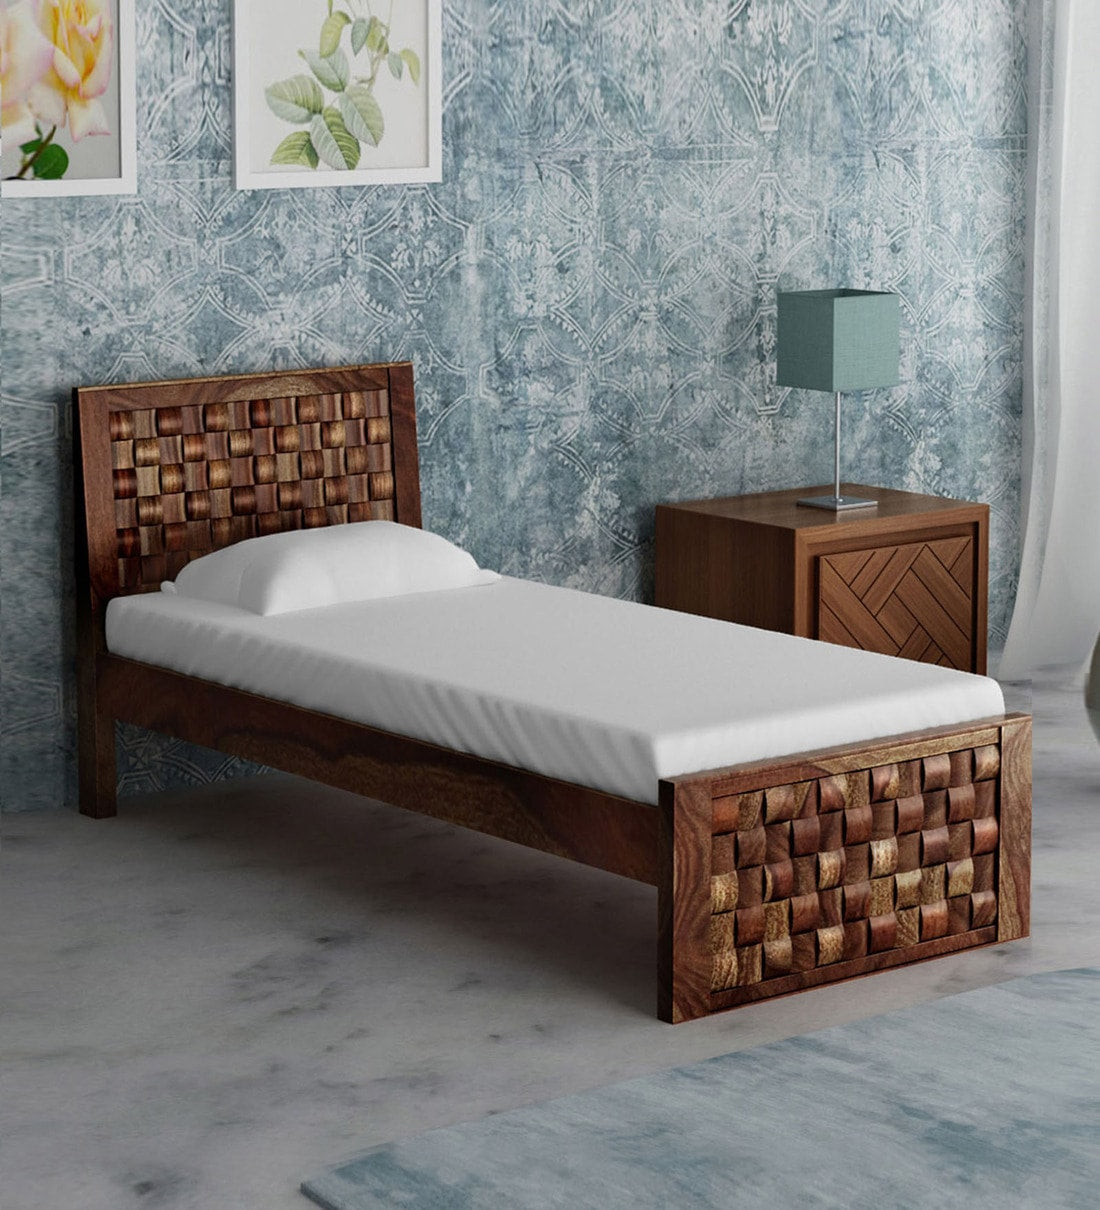 Niware Wooden Single Size Bed for Bedroom Without Storage - Rajwada Furnish